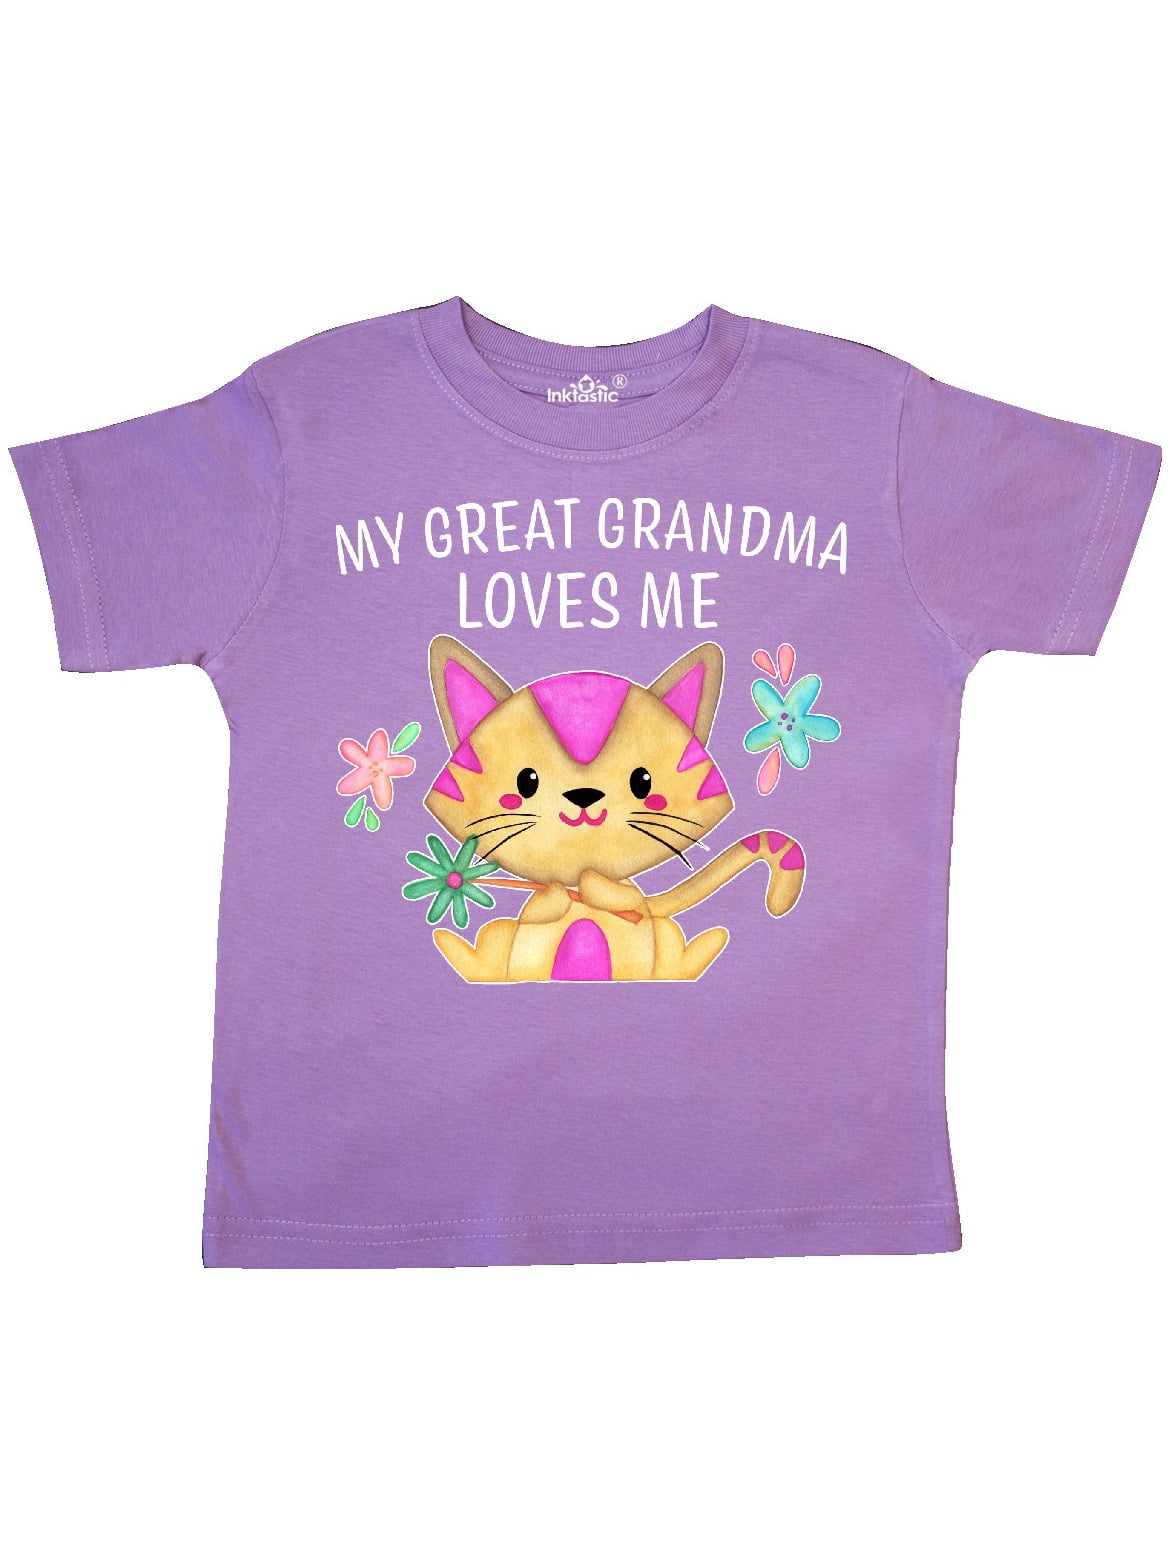 Awesome Nana Cat Unisex T-Shirt for Wonderful and Amazing Grandma with Adorable Cat Kitten with Colorful Plants and Flowers